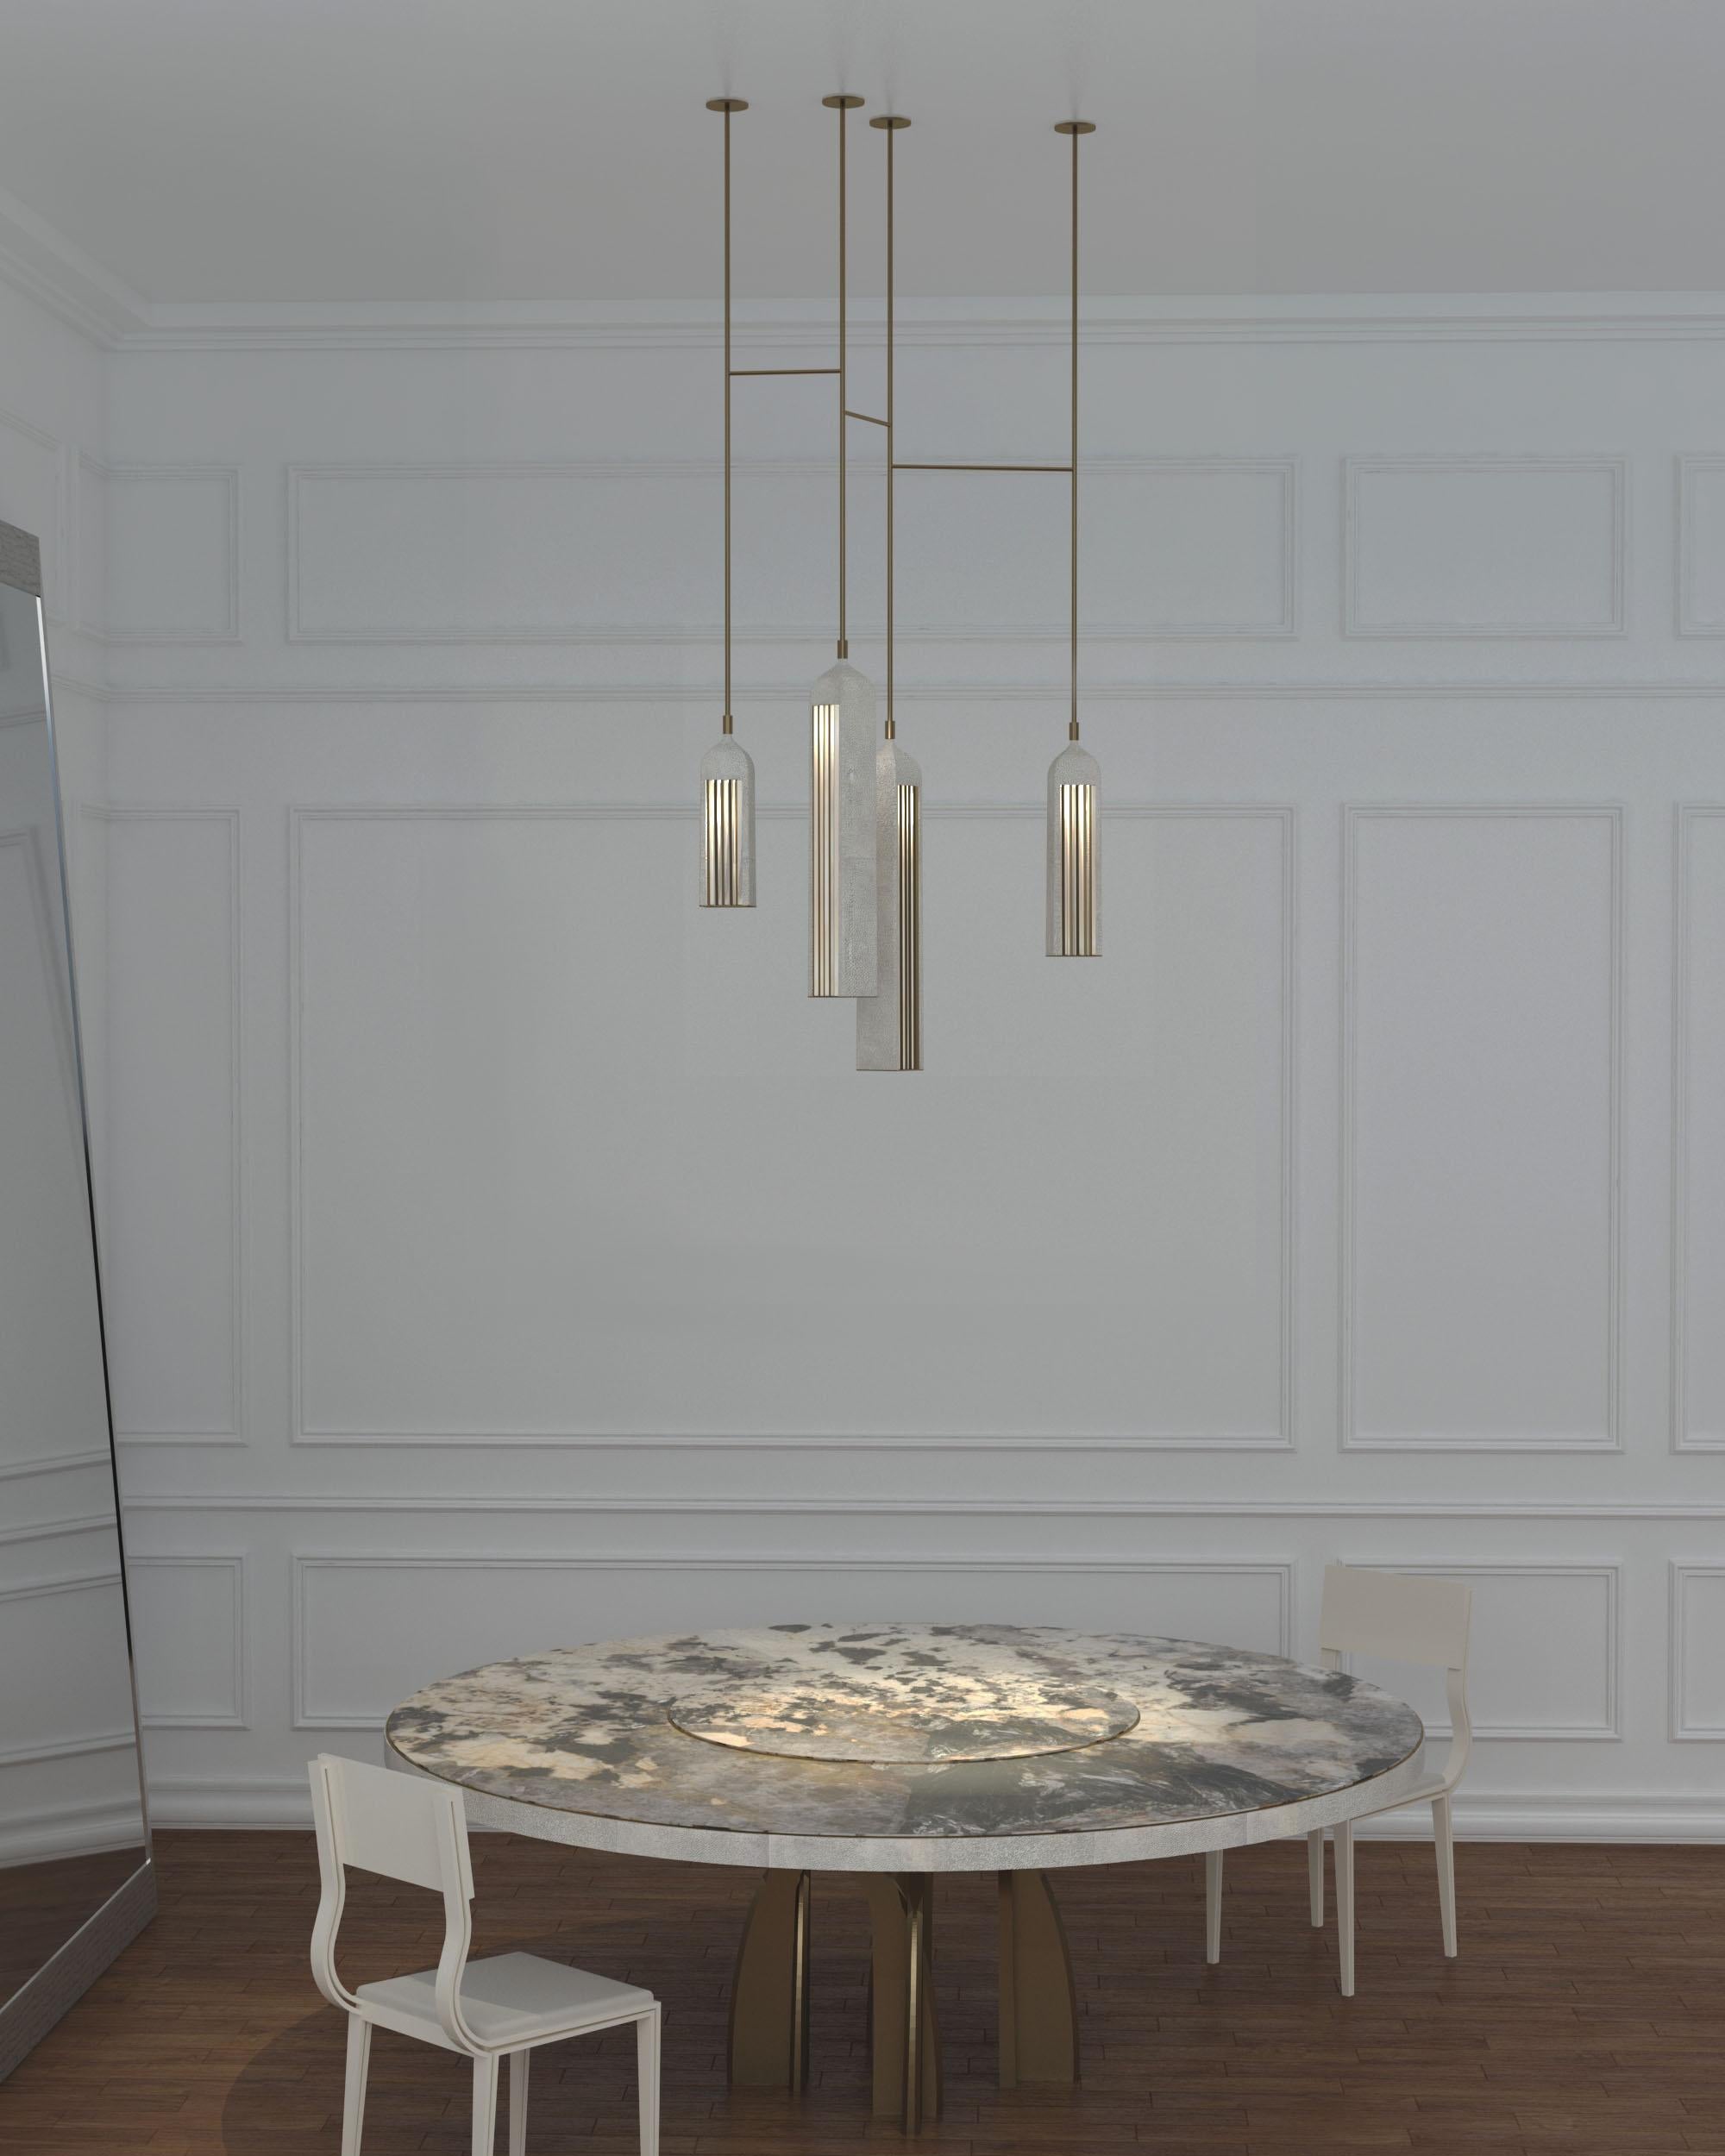 Patrick Coard Paris launches a unique and beautifully sculptural lighting collection inspired by music as a continuation of his candle line. The Rhapsody Cluster I Chandelier is an ethereal and sculptural piece. The metal or quartz slats are